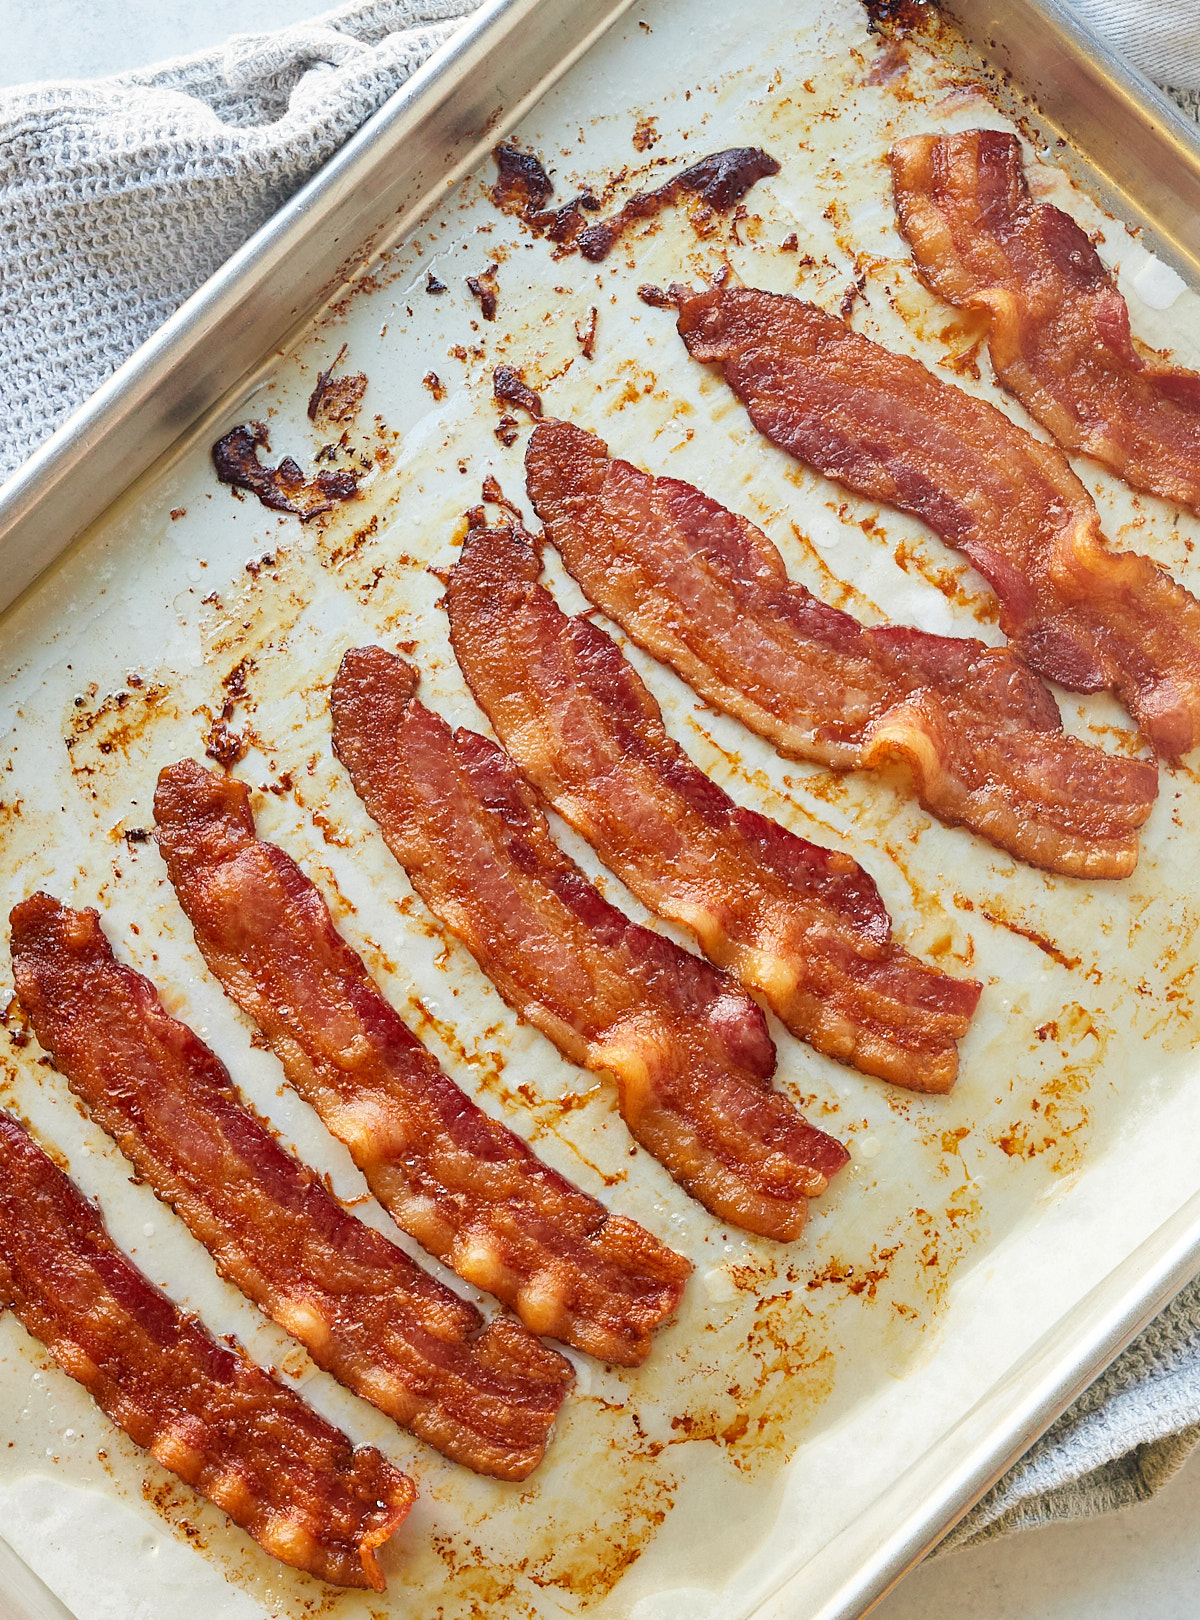 How To Bake Bacon In the Oven